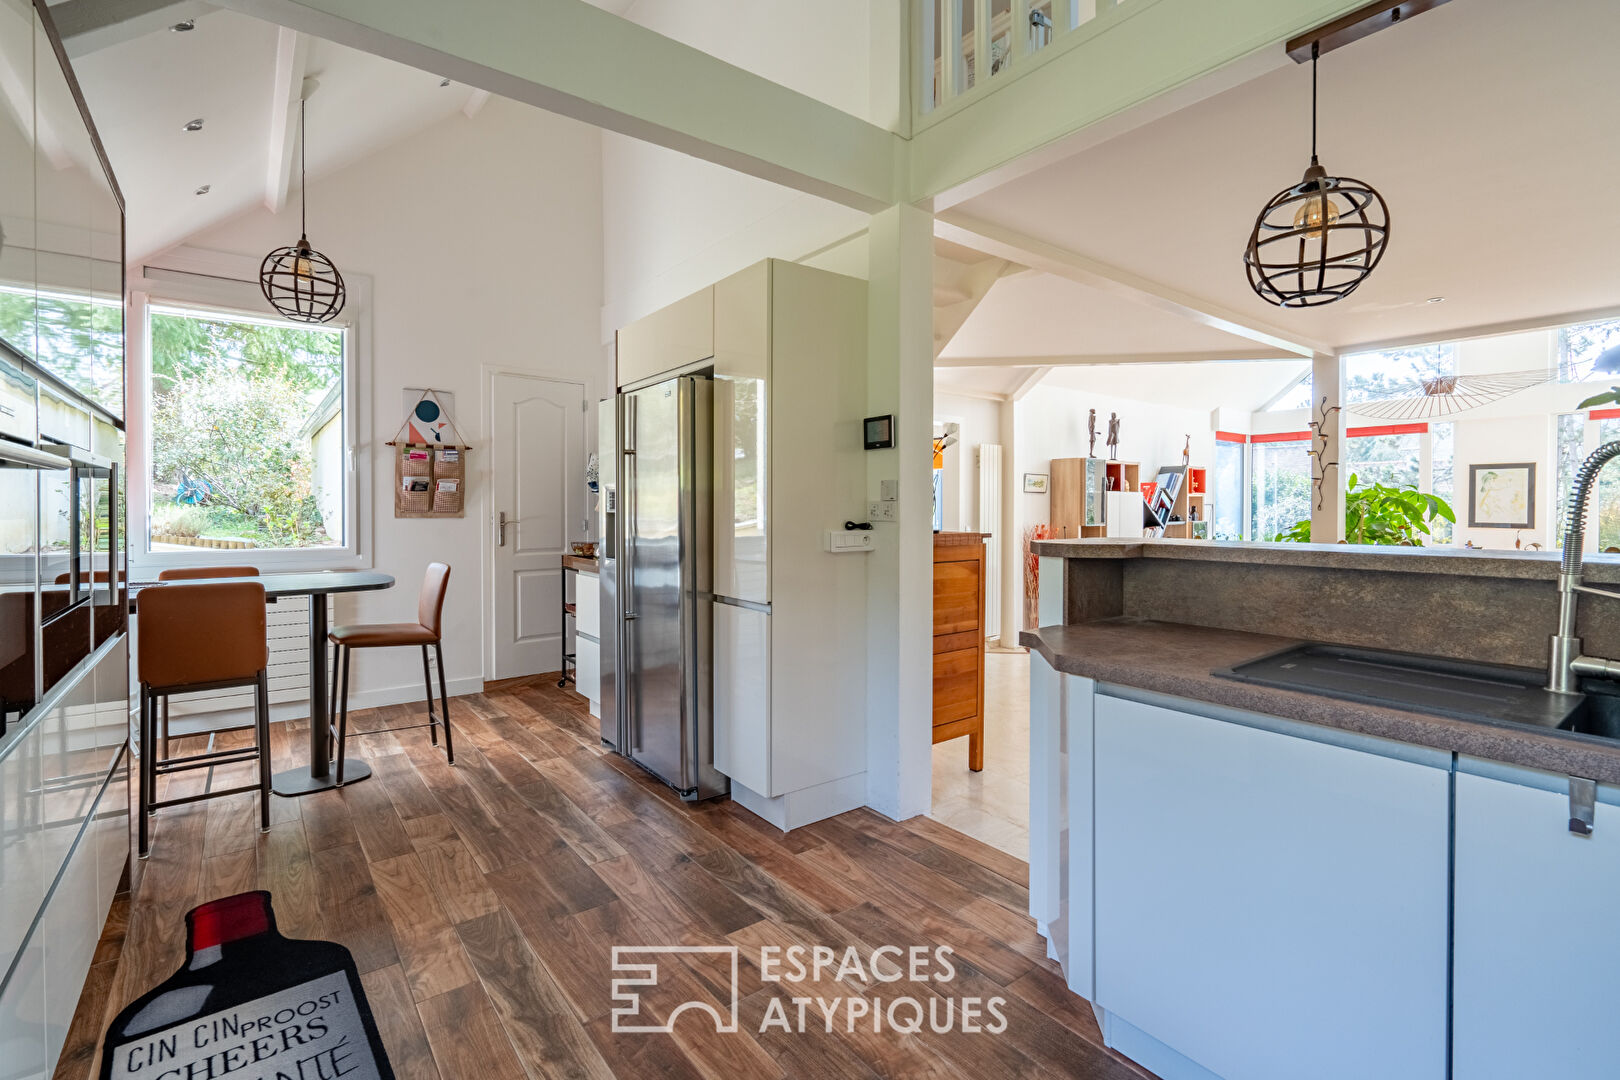 Superb family home in the heart of the Chevreuse valley